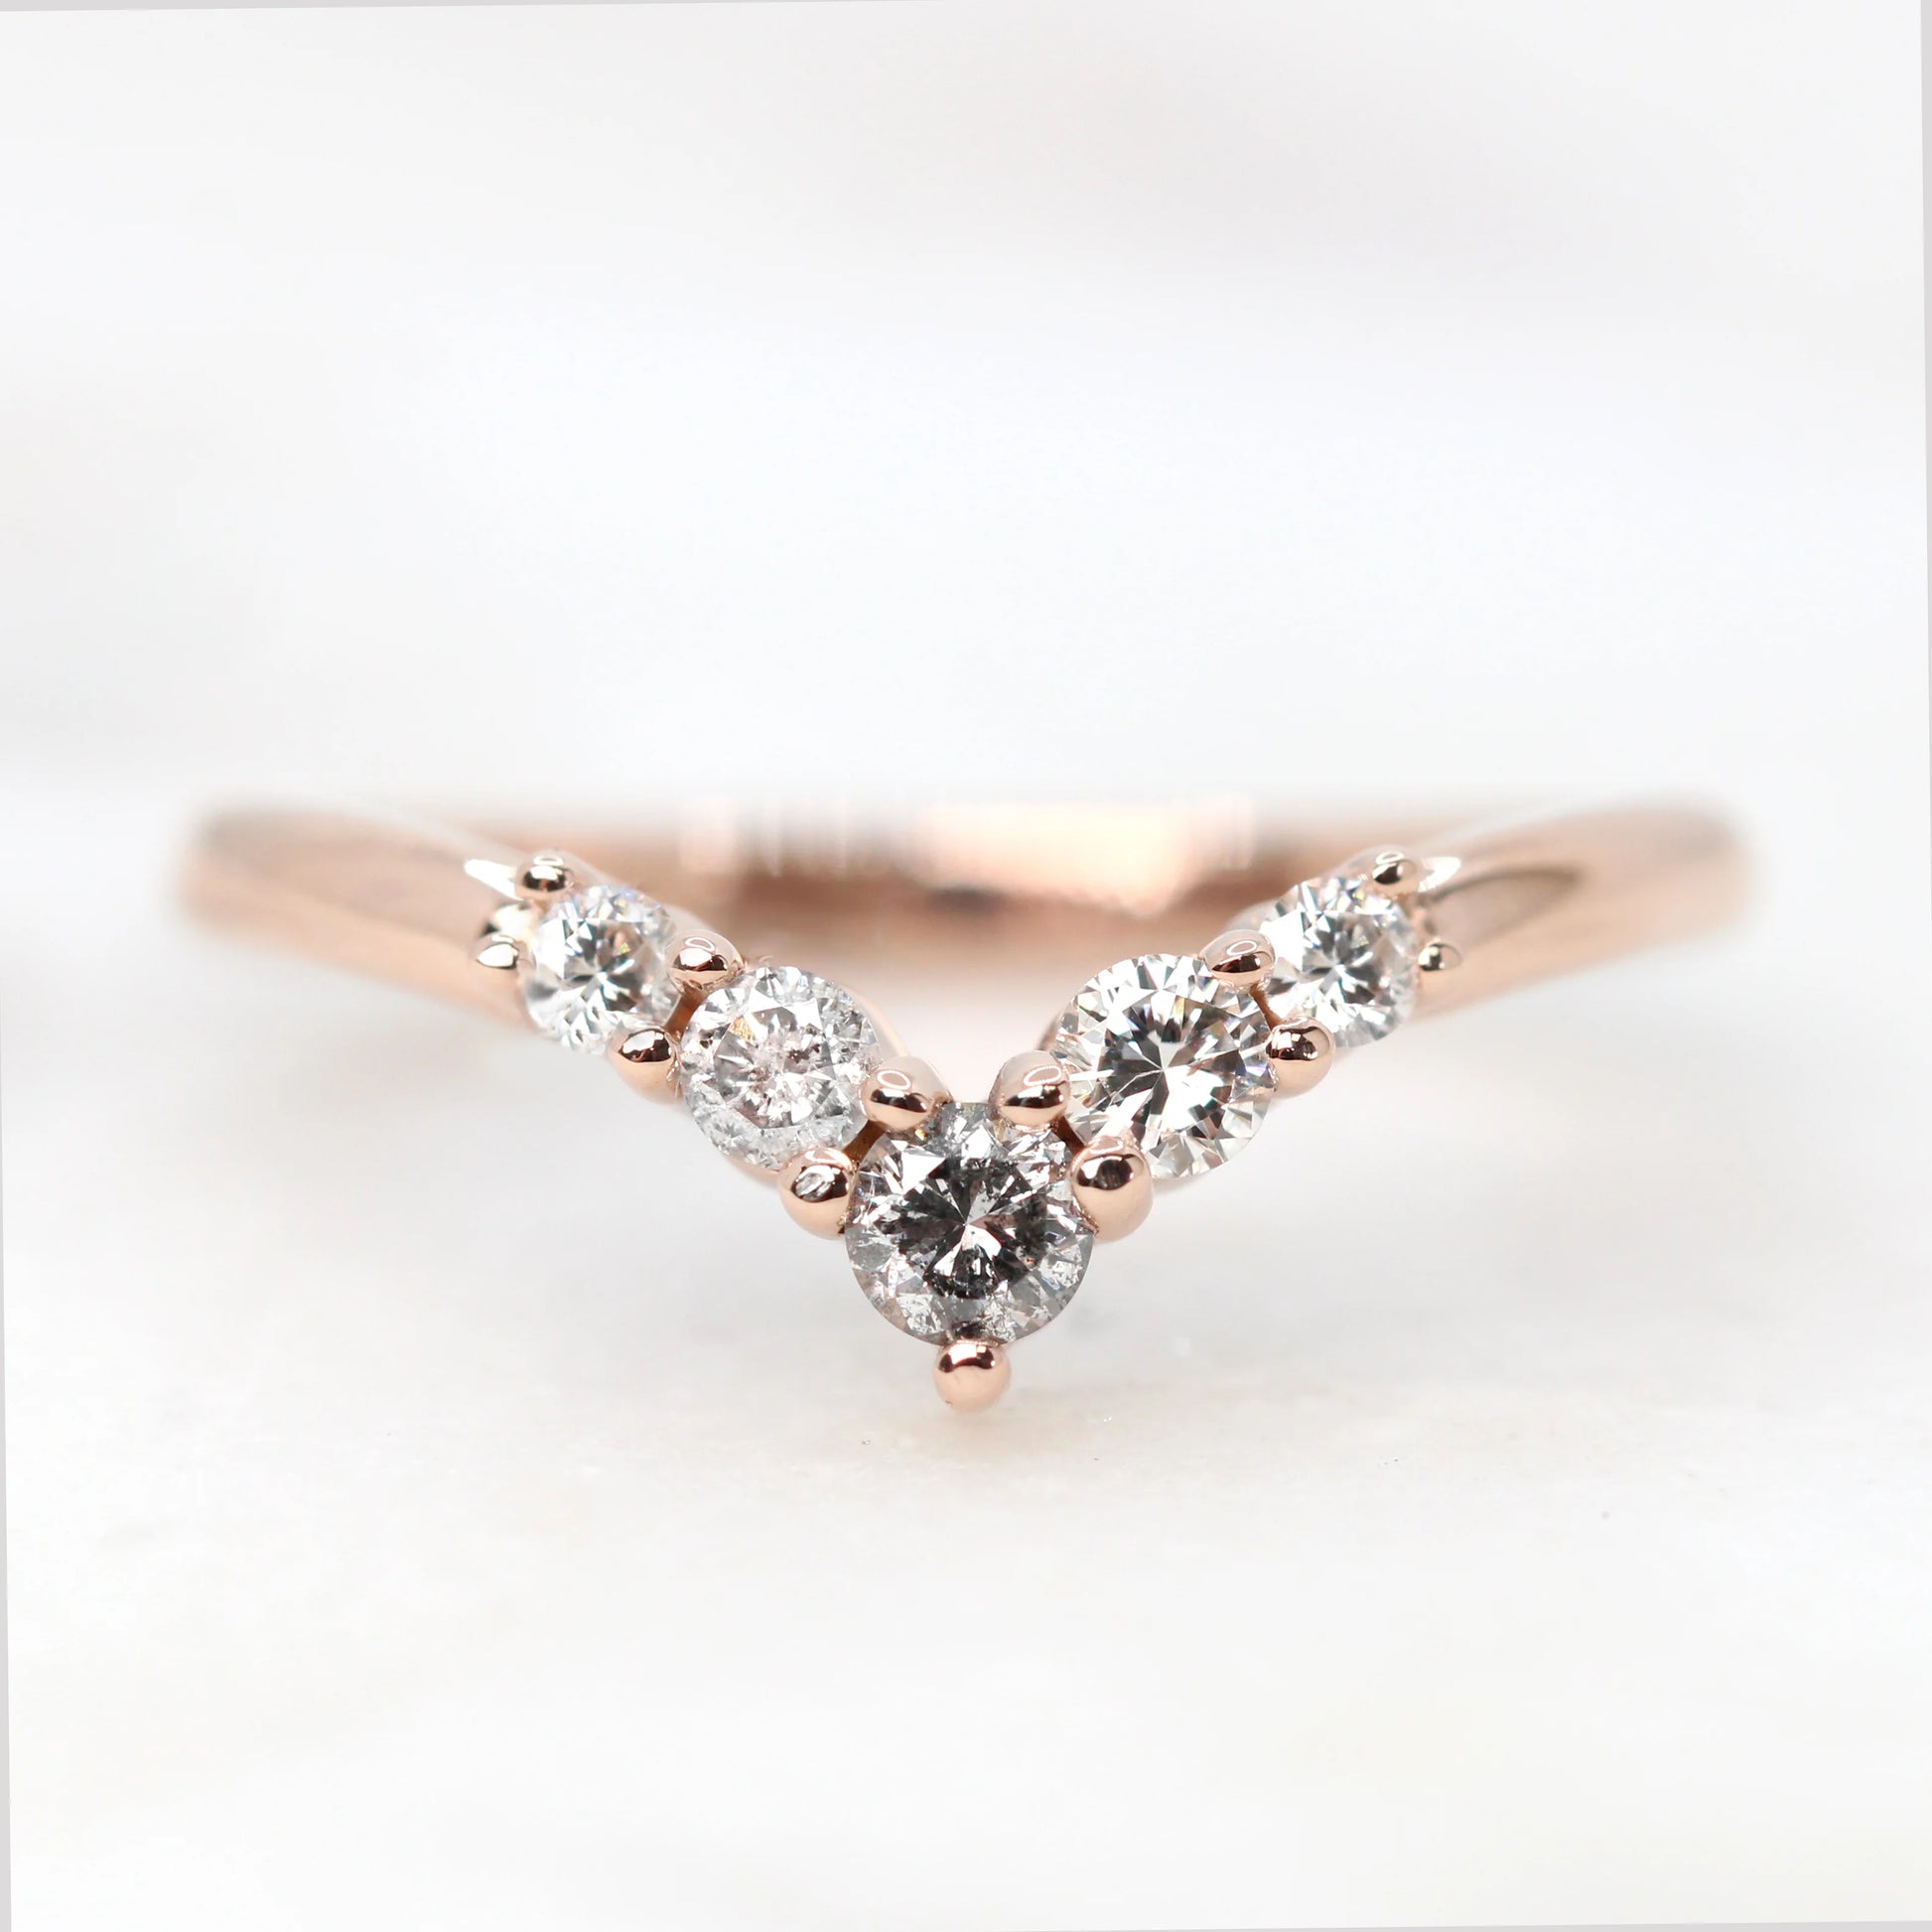 Rhiannon - Contour V-Shape Diamond Band with Gray Diamonds in Your Choice of 14K Gold - Midwinter Co. Alternative Bridal Rings and Modern Fine Jewelry